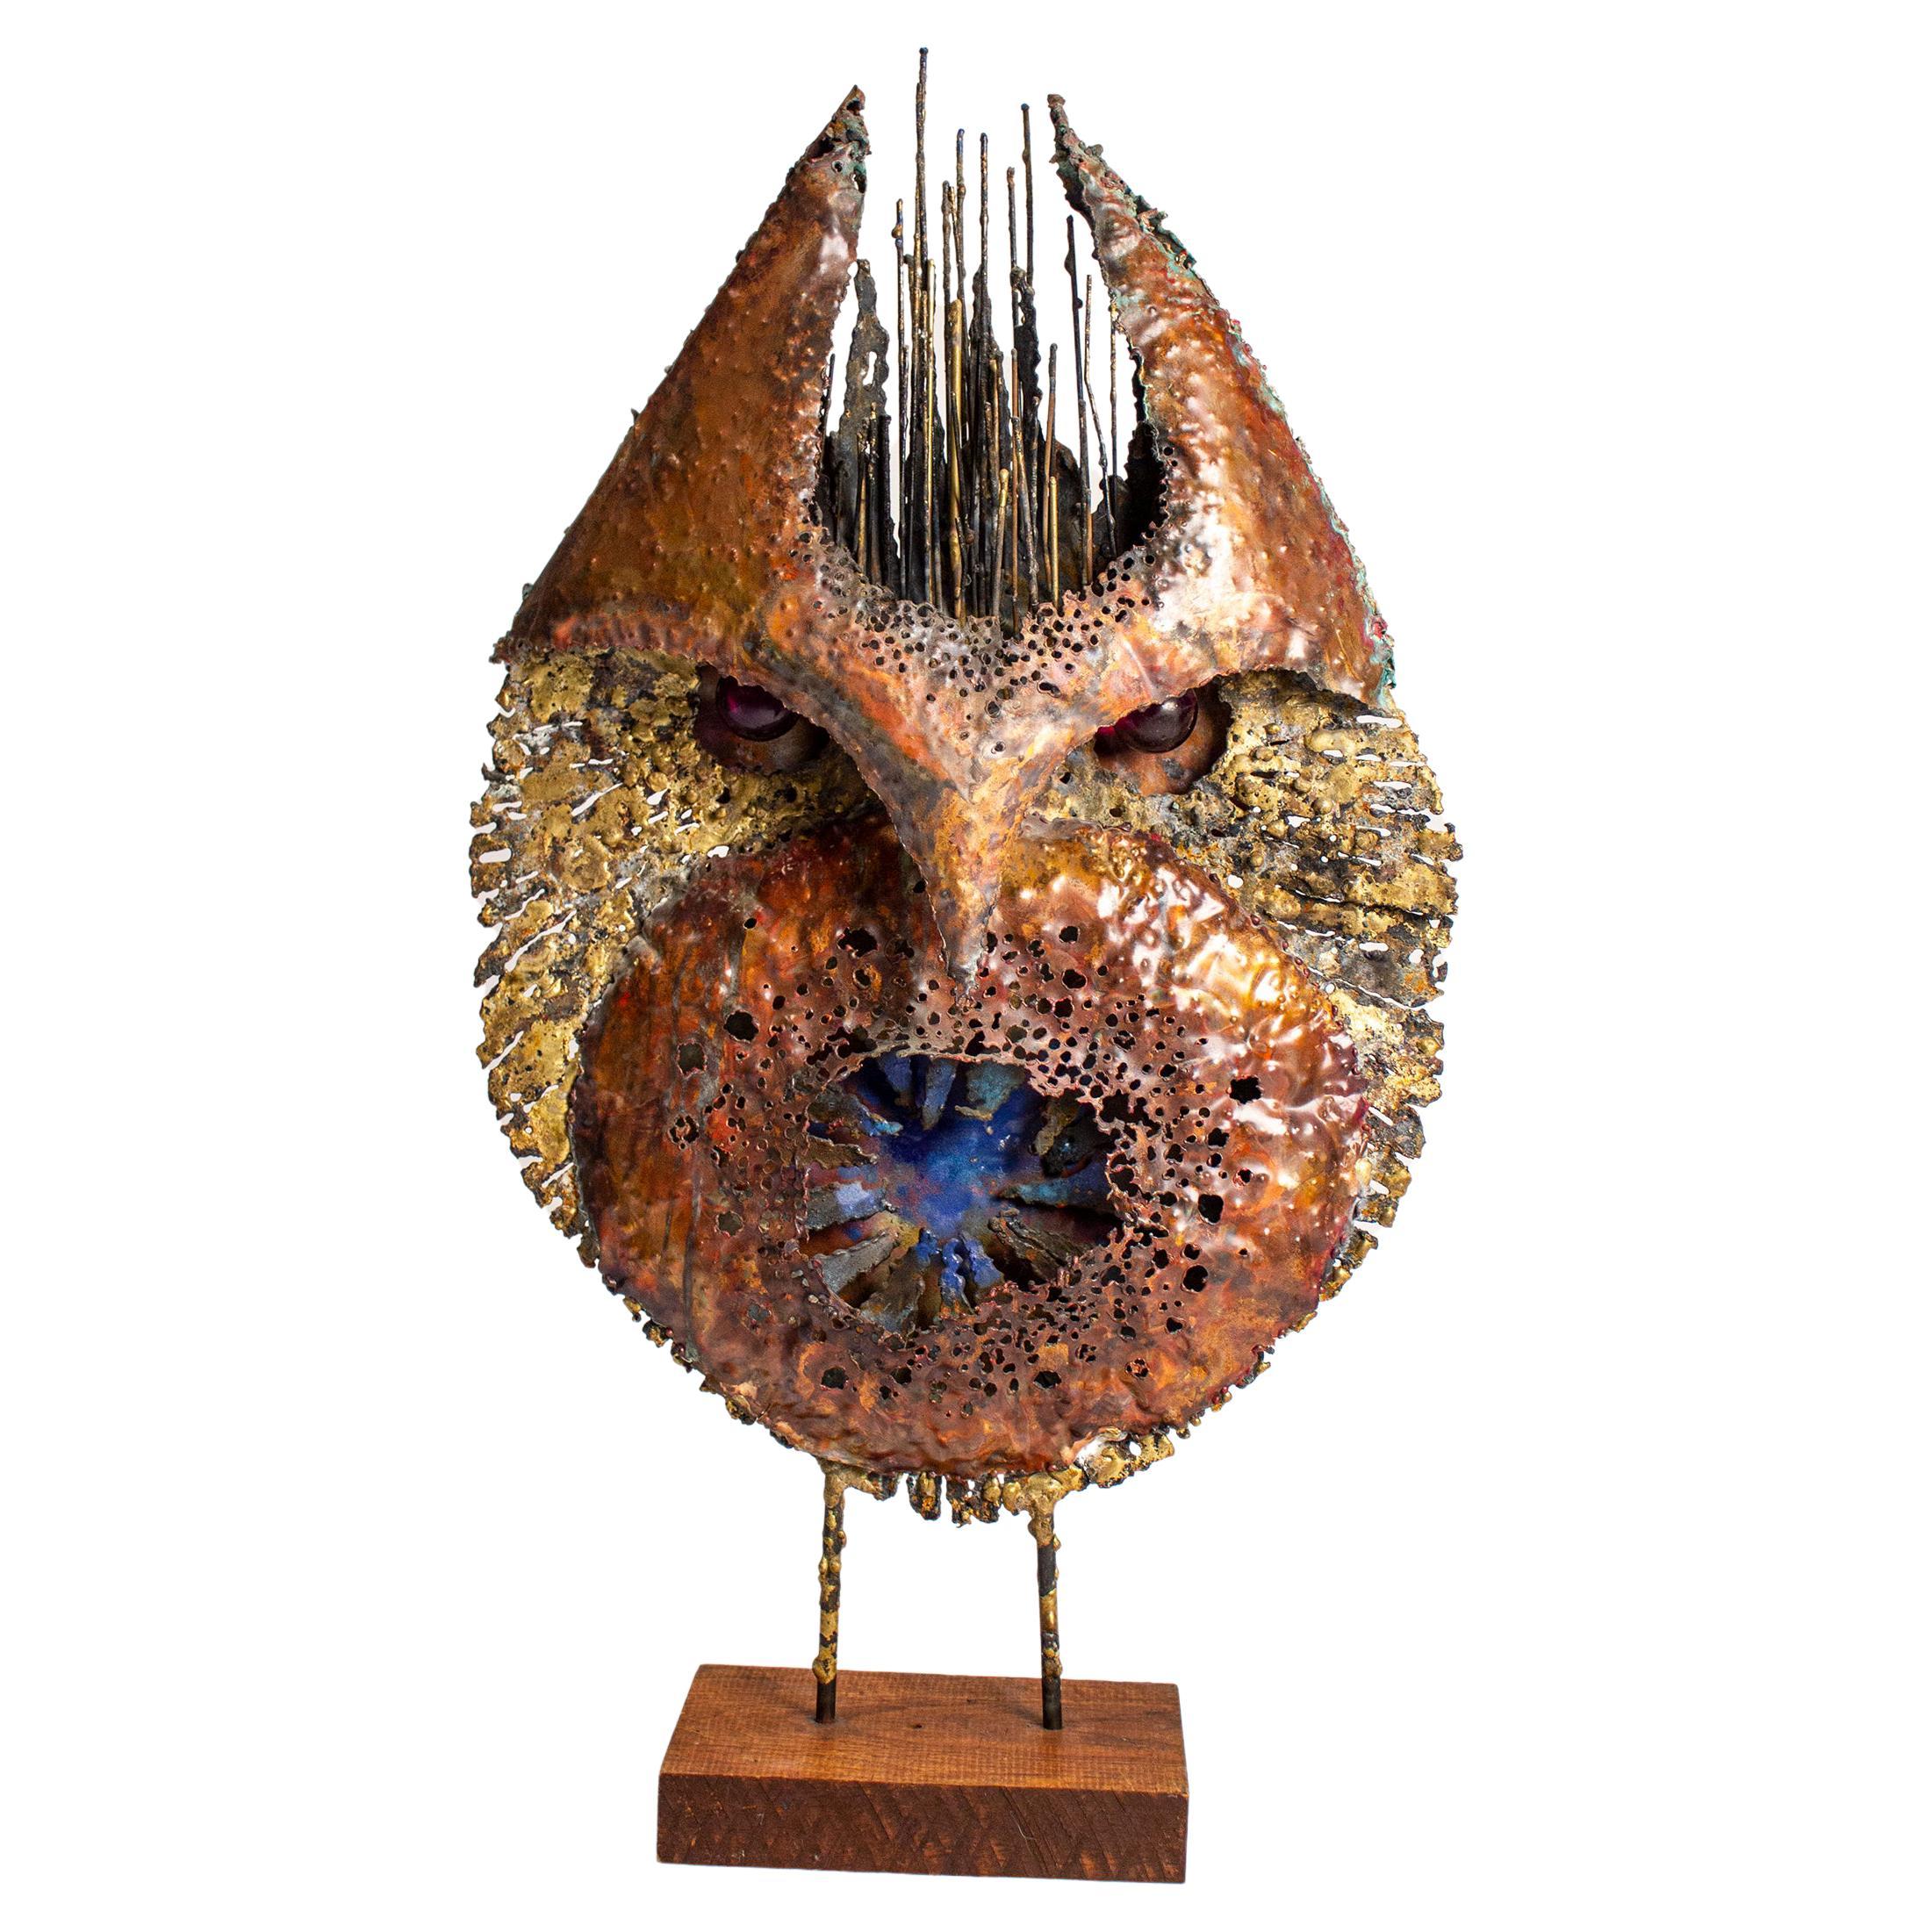 James Bearden Large Scale Brutalist Owl Sculpture from His "Animal Series"